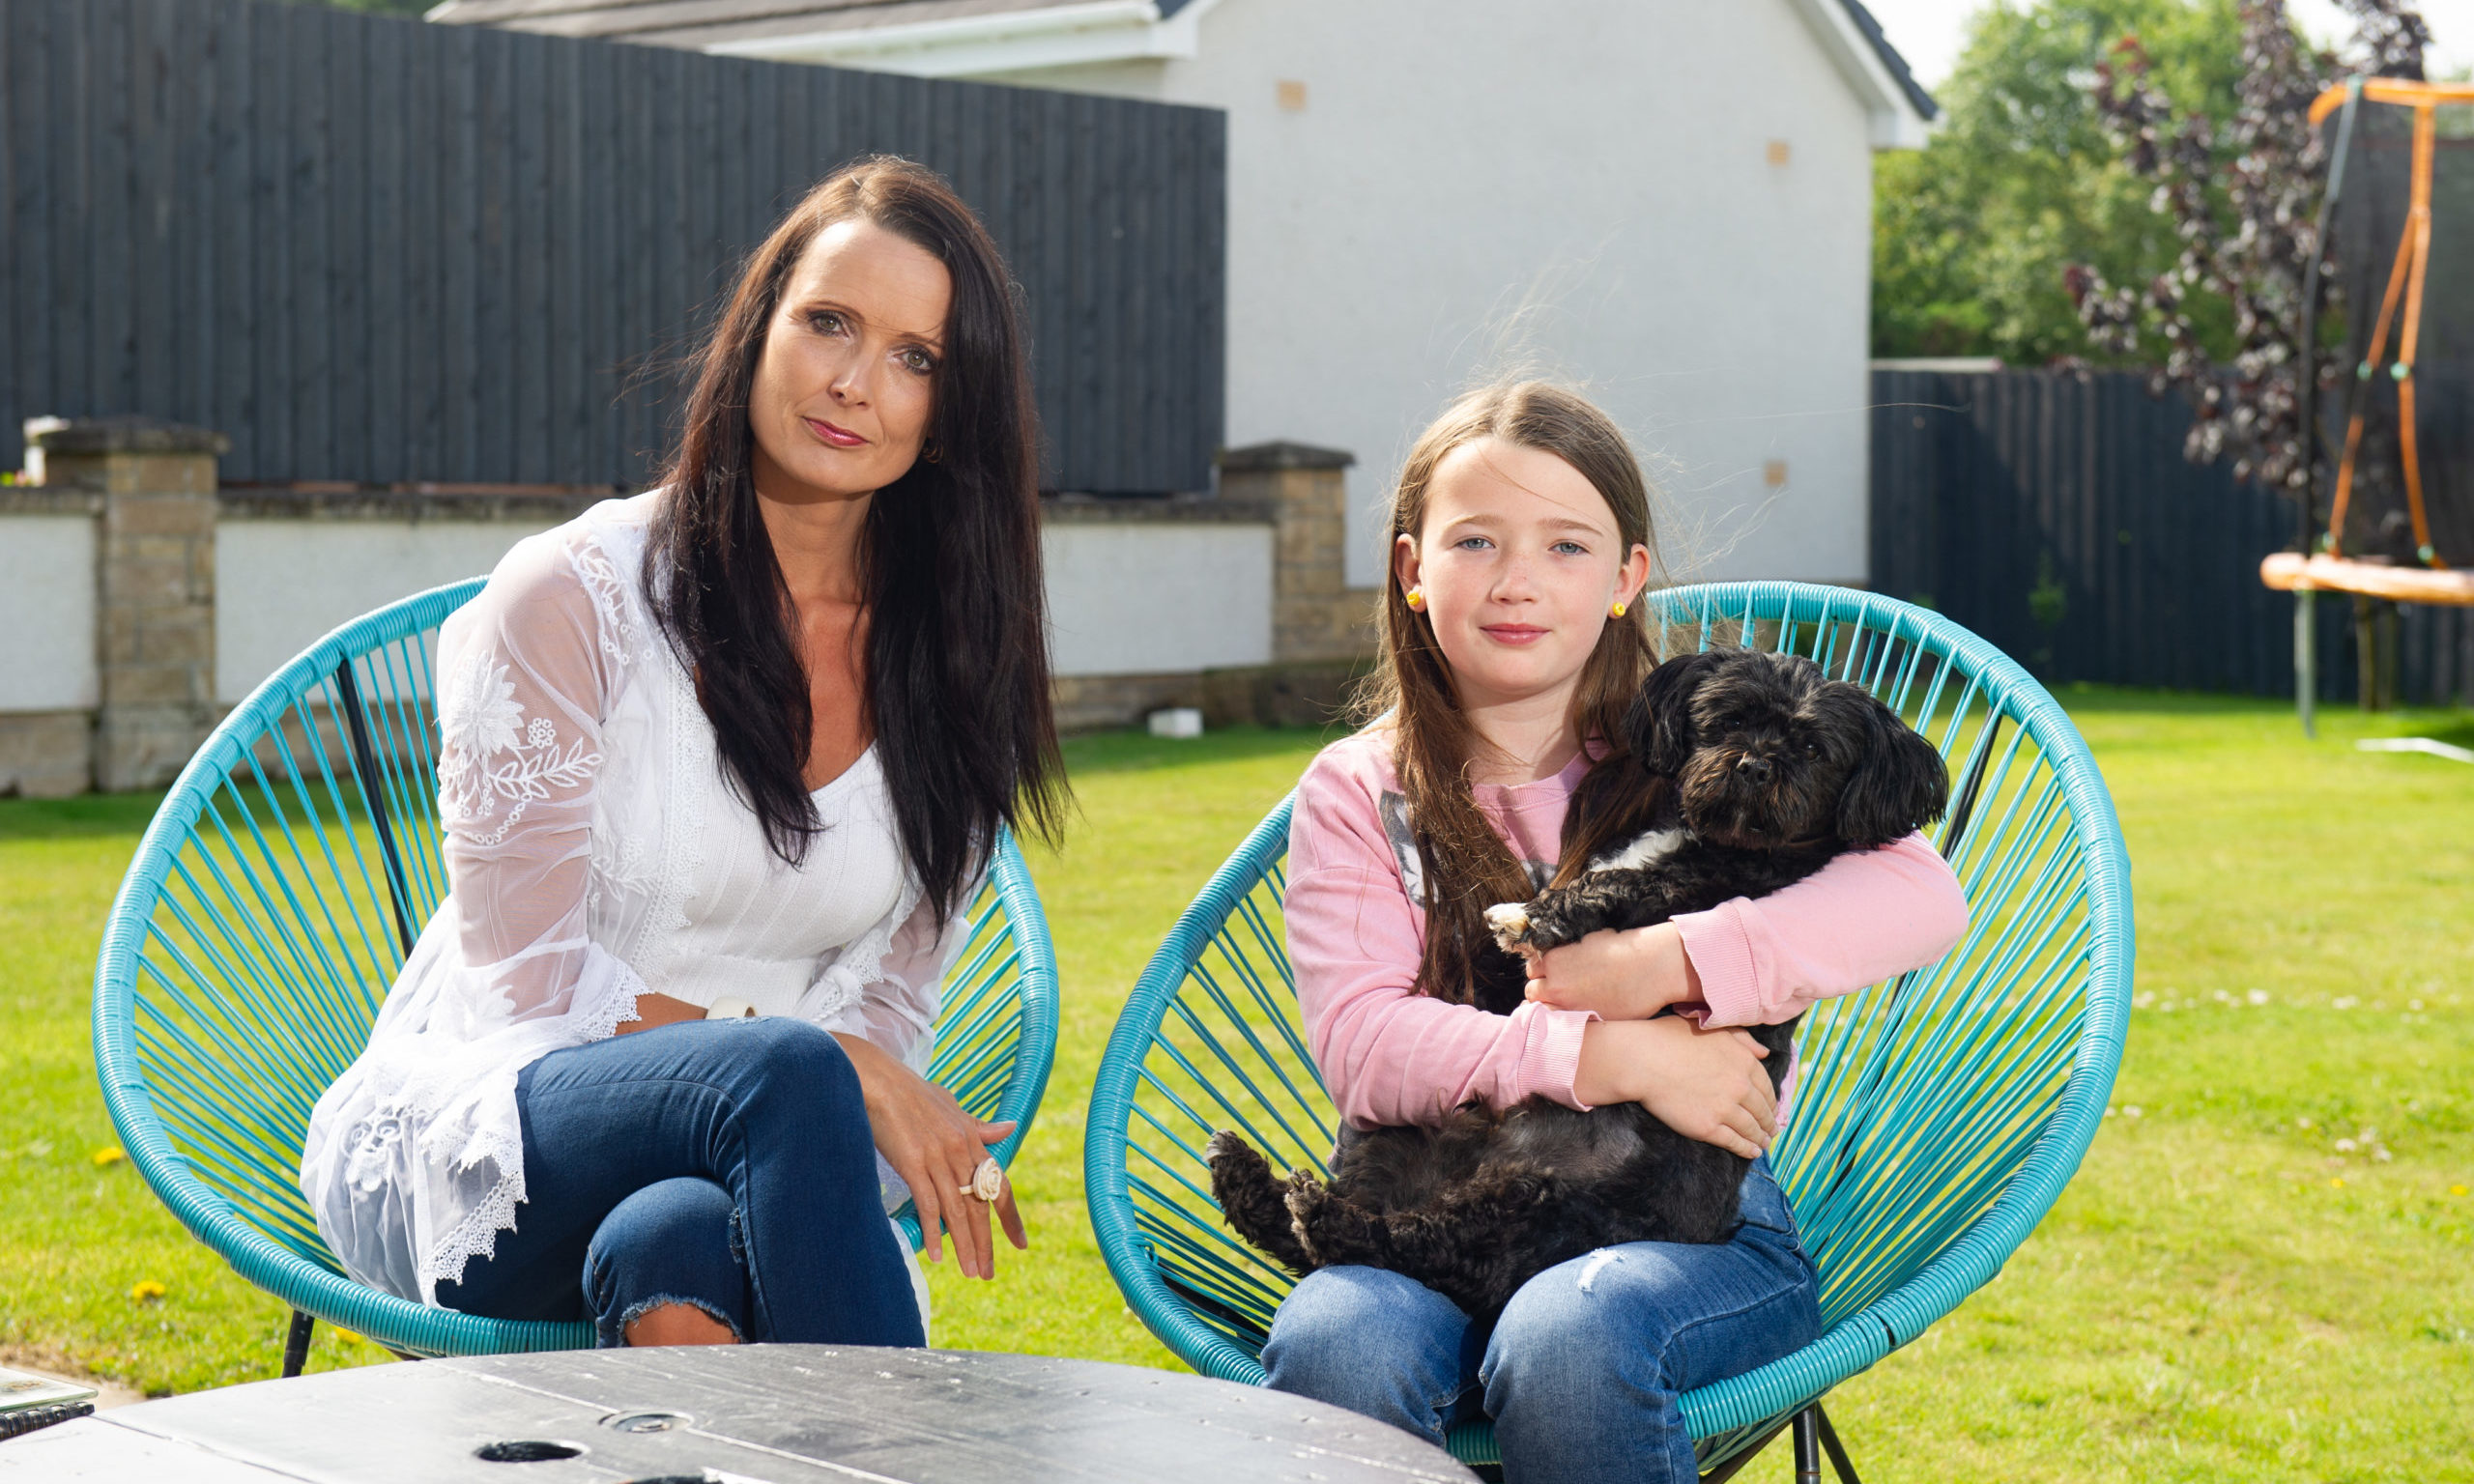 Sharon Fraser has grown frustrated waiting for answers from Highland Council over the refund of daughter Summer's cancelled school trip.
Pictures by Jason Hedges.